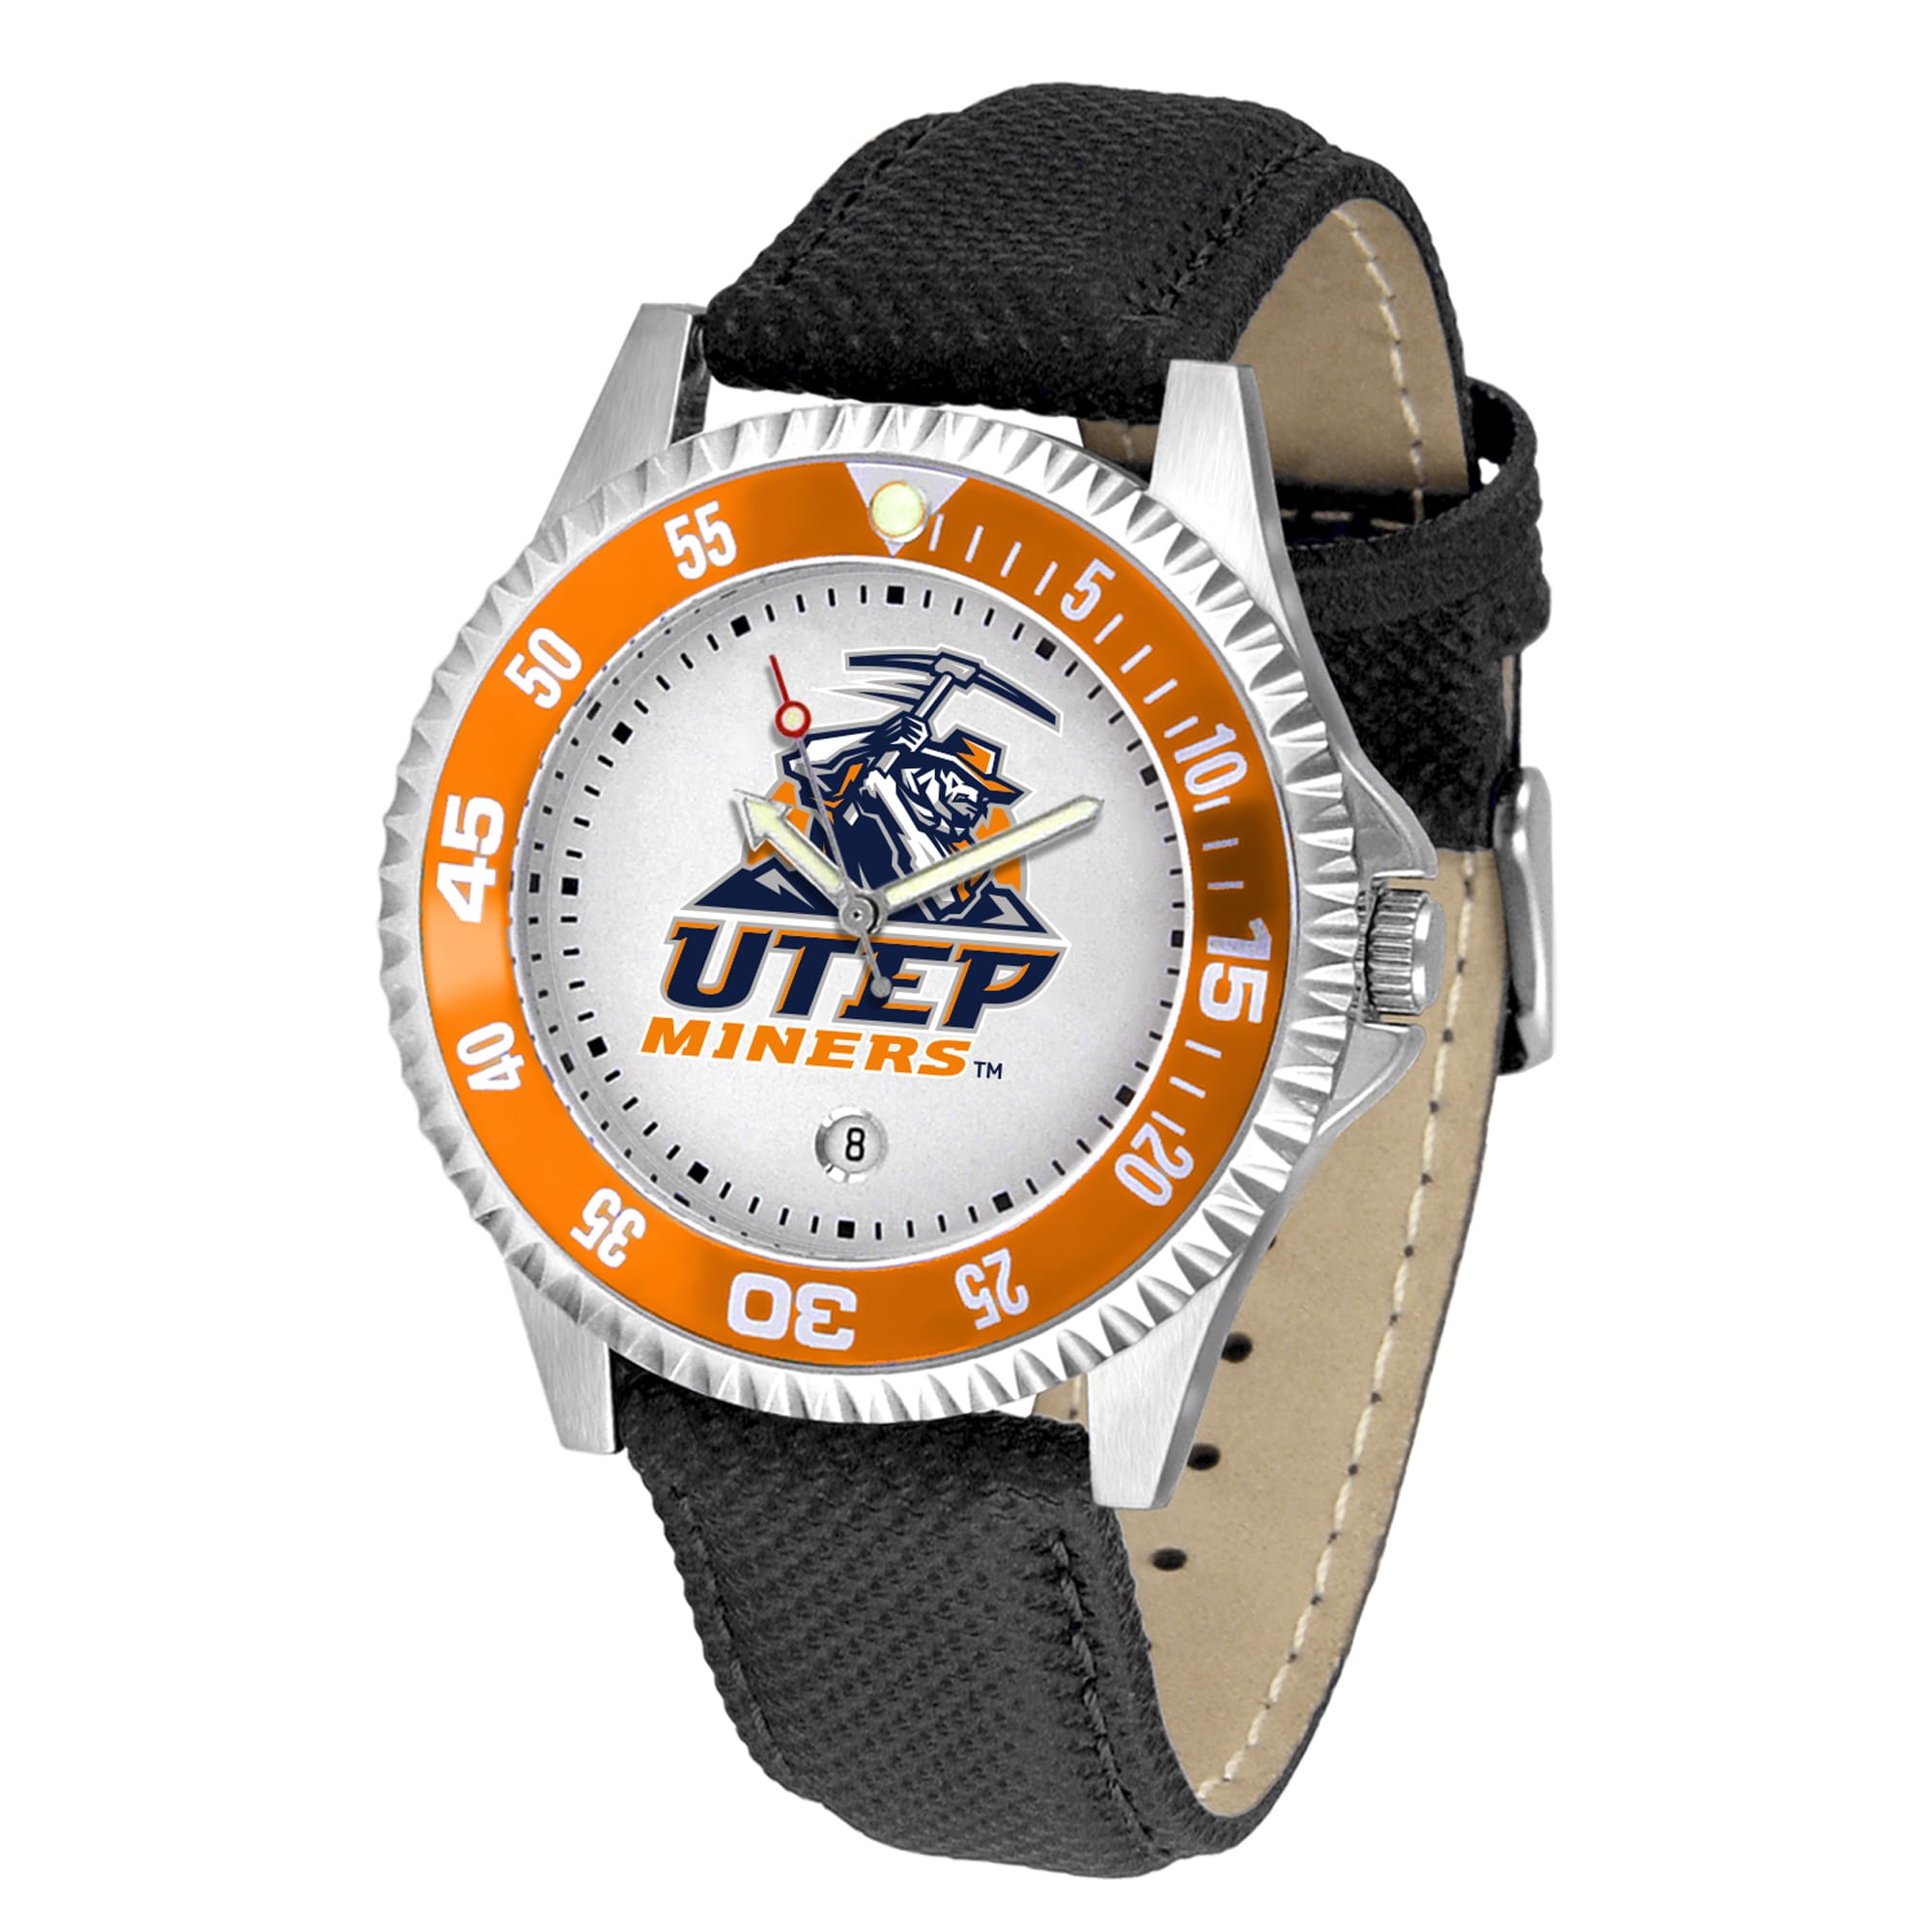 White UTEP Miners Competitor Watch - image 1 of 4